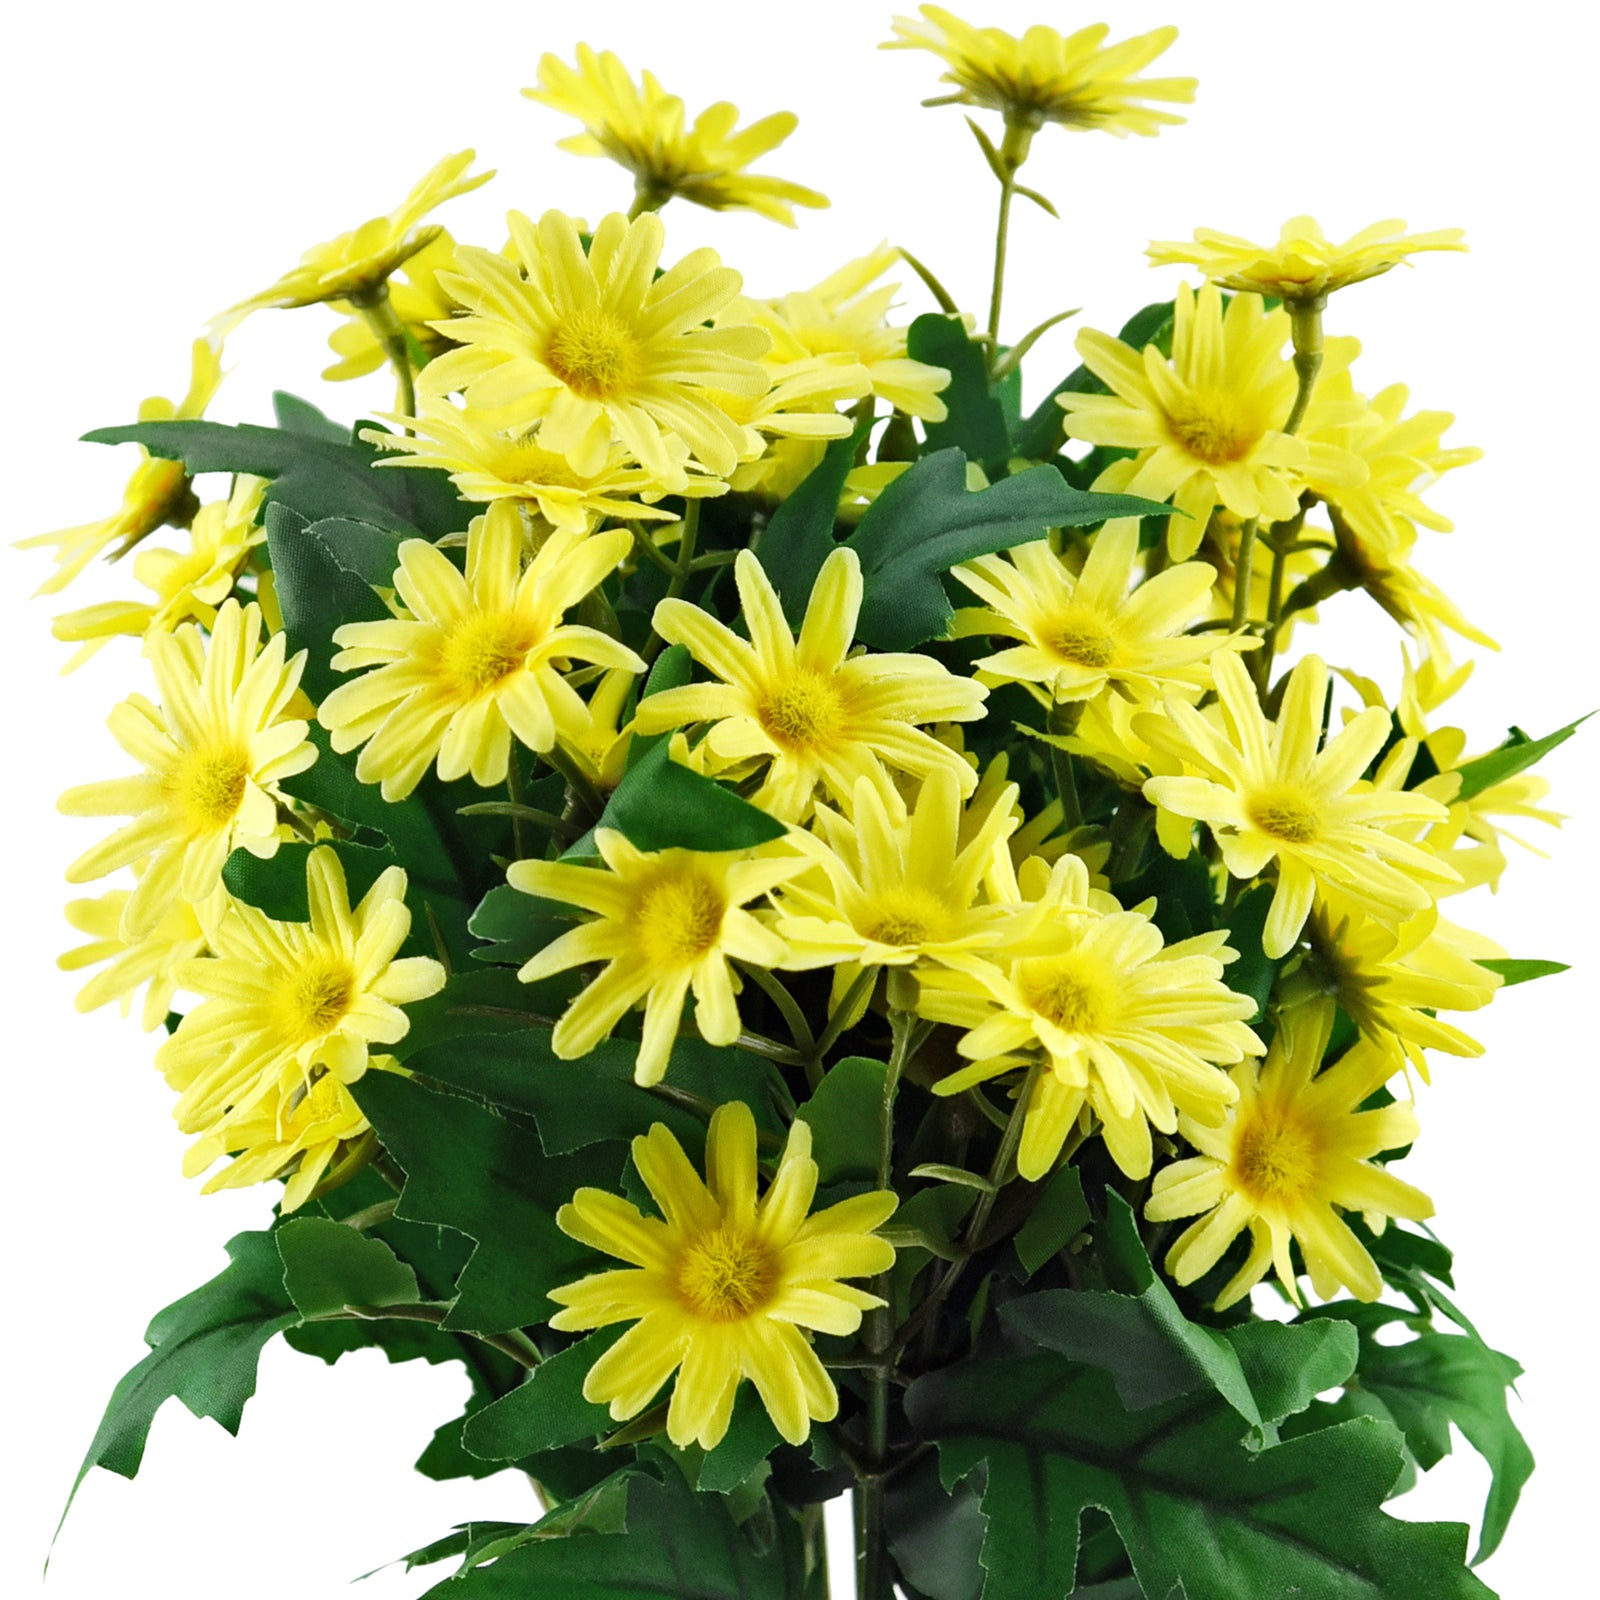 Daisy Silk Flowers Outdoor Artificial Flowers Arrangements (Sunny Yellow) 2 Bunches